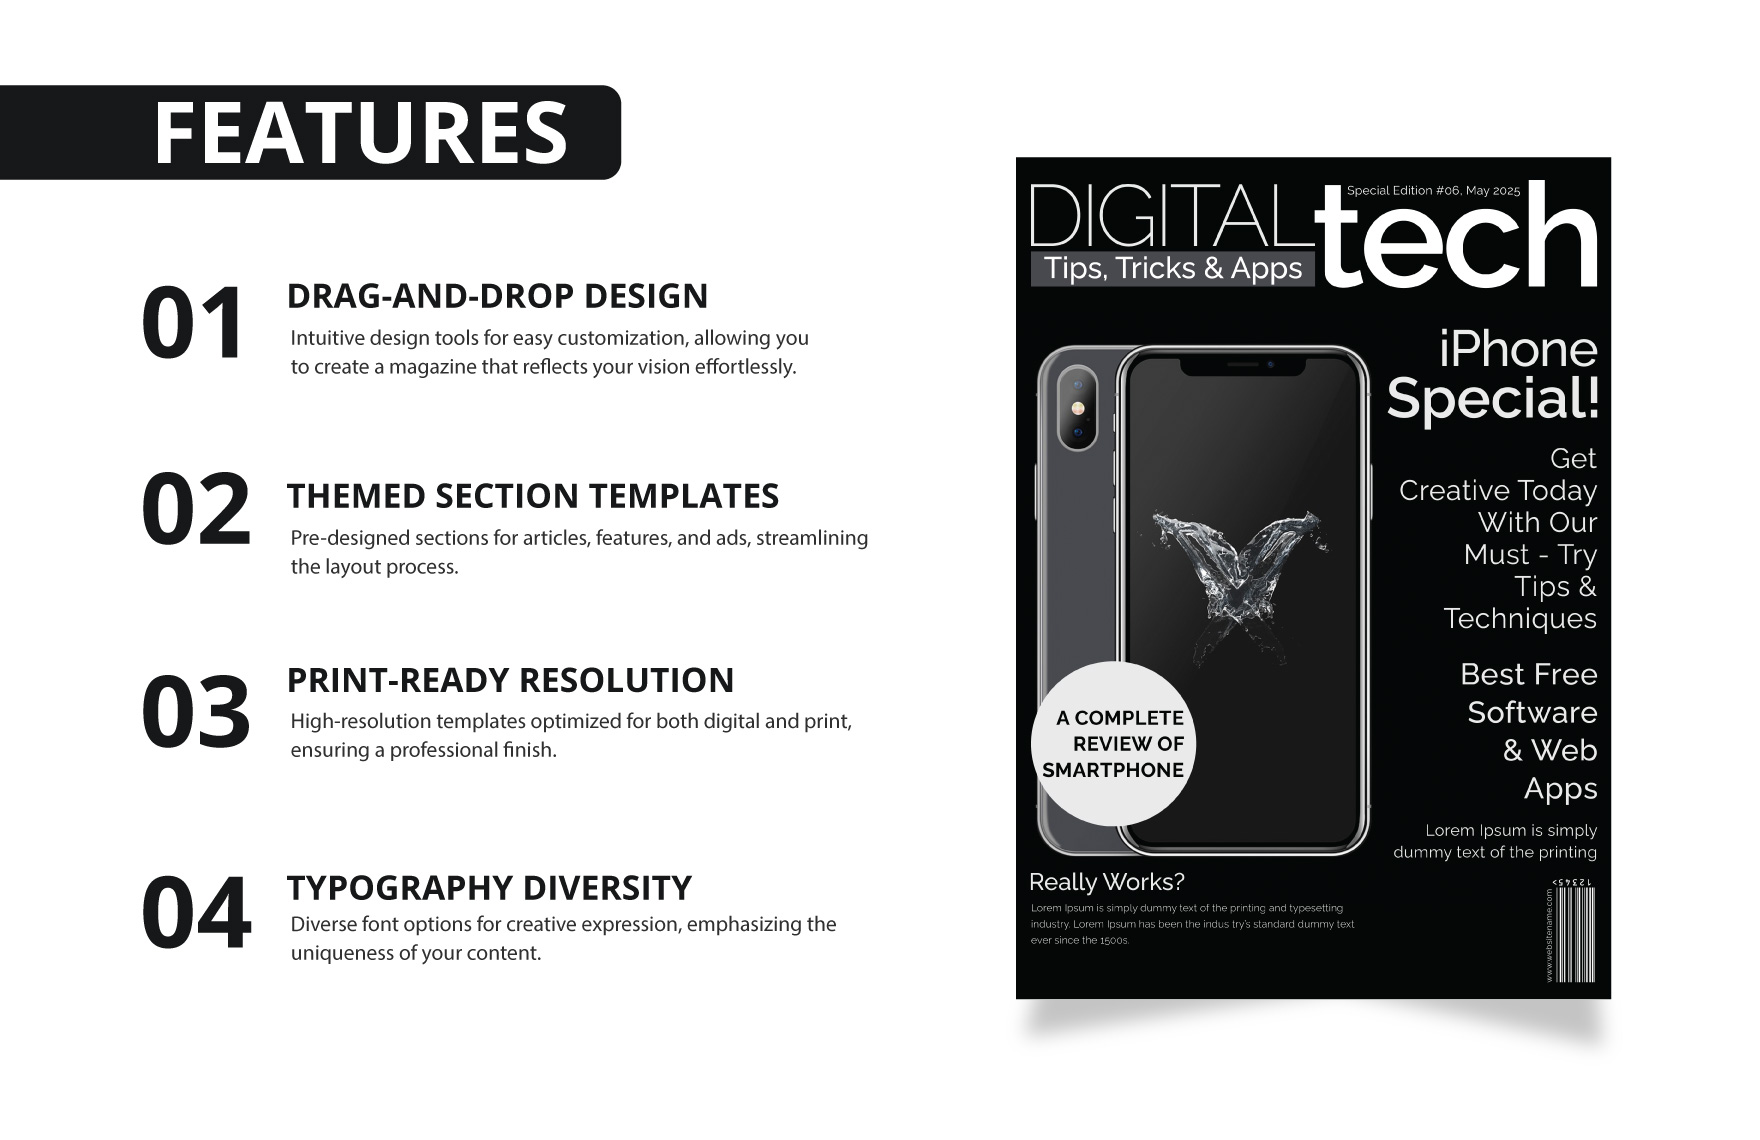 Technology Magazine Cover Page Template